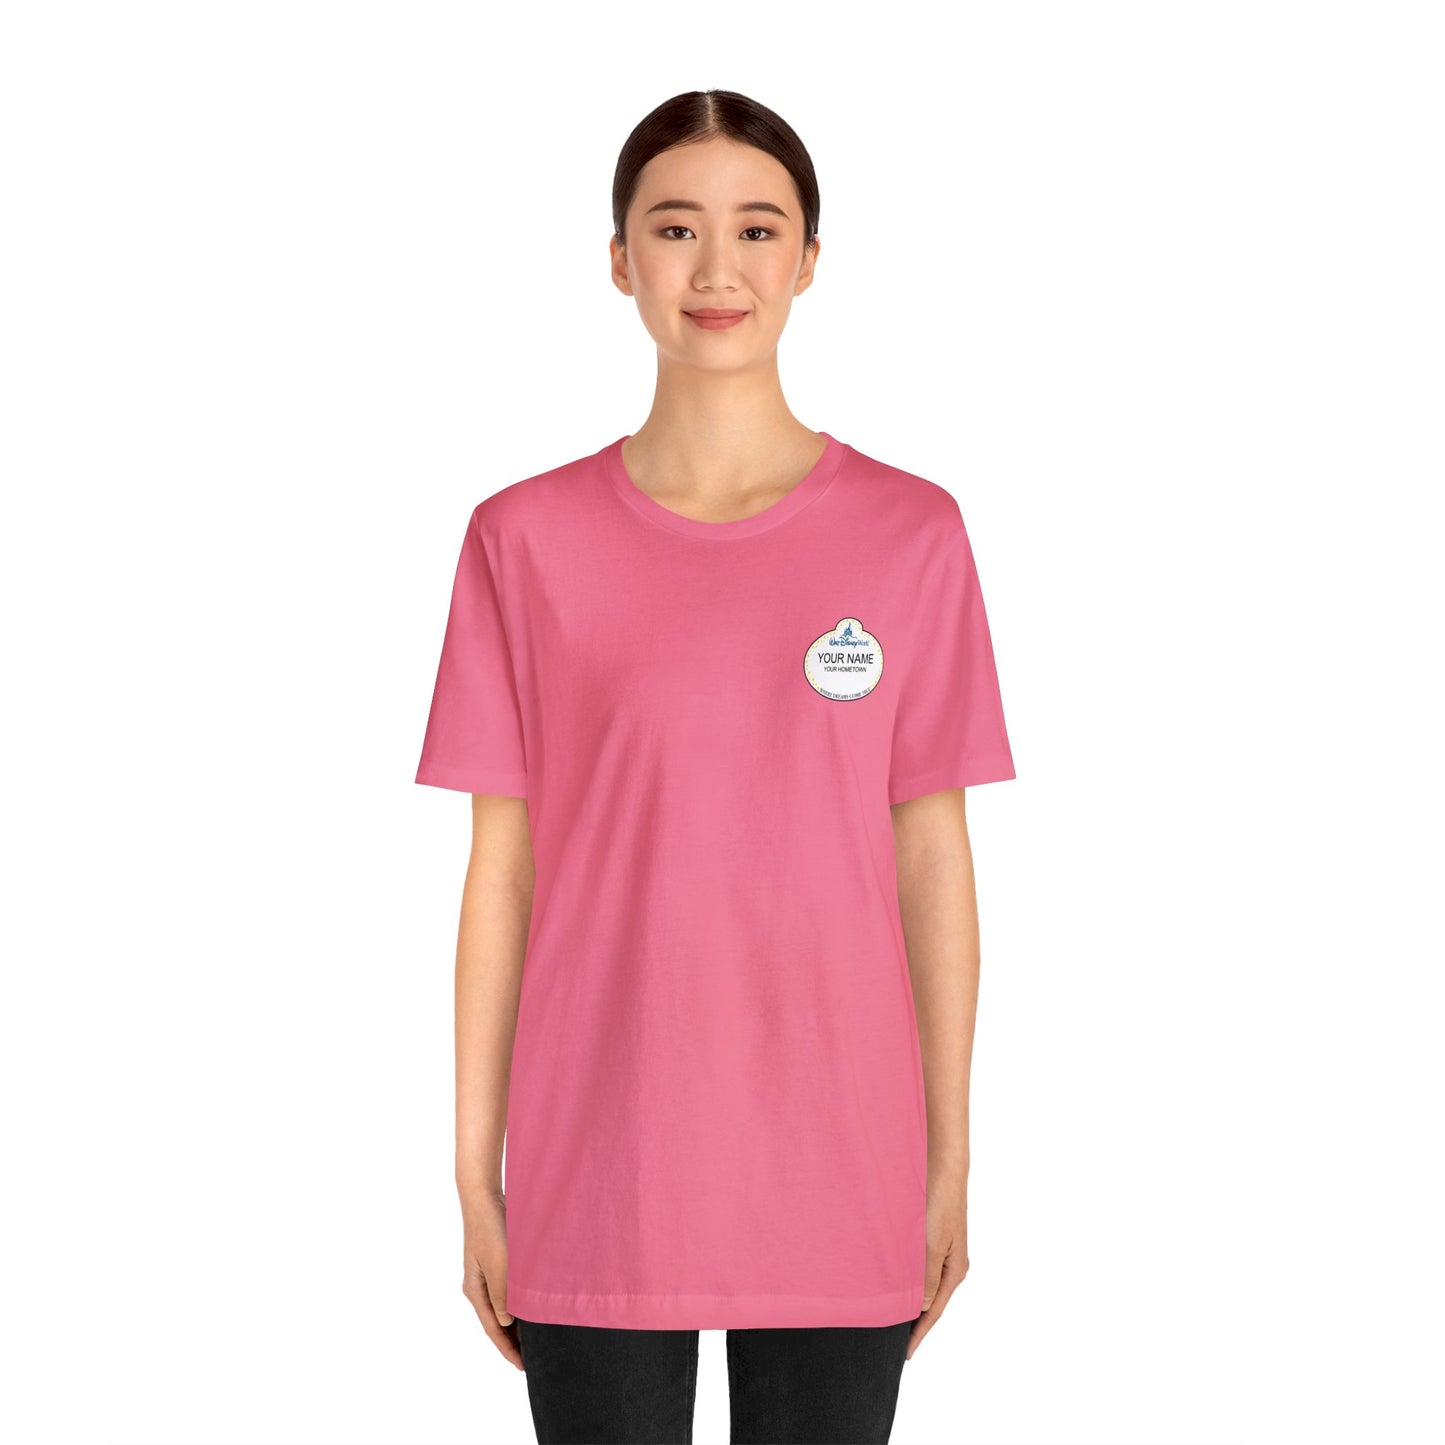 Customizable Name Tag Unisex Graphic Tee - Multiple Colors